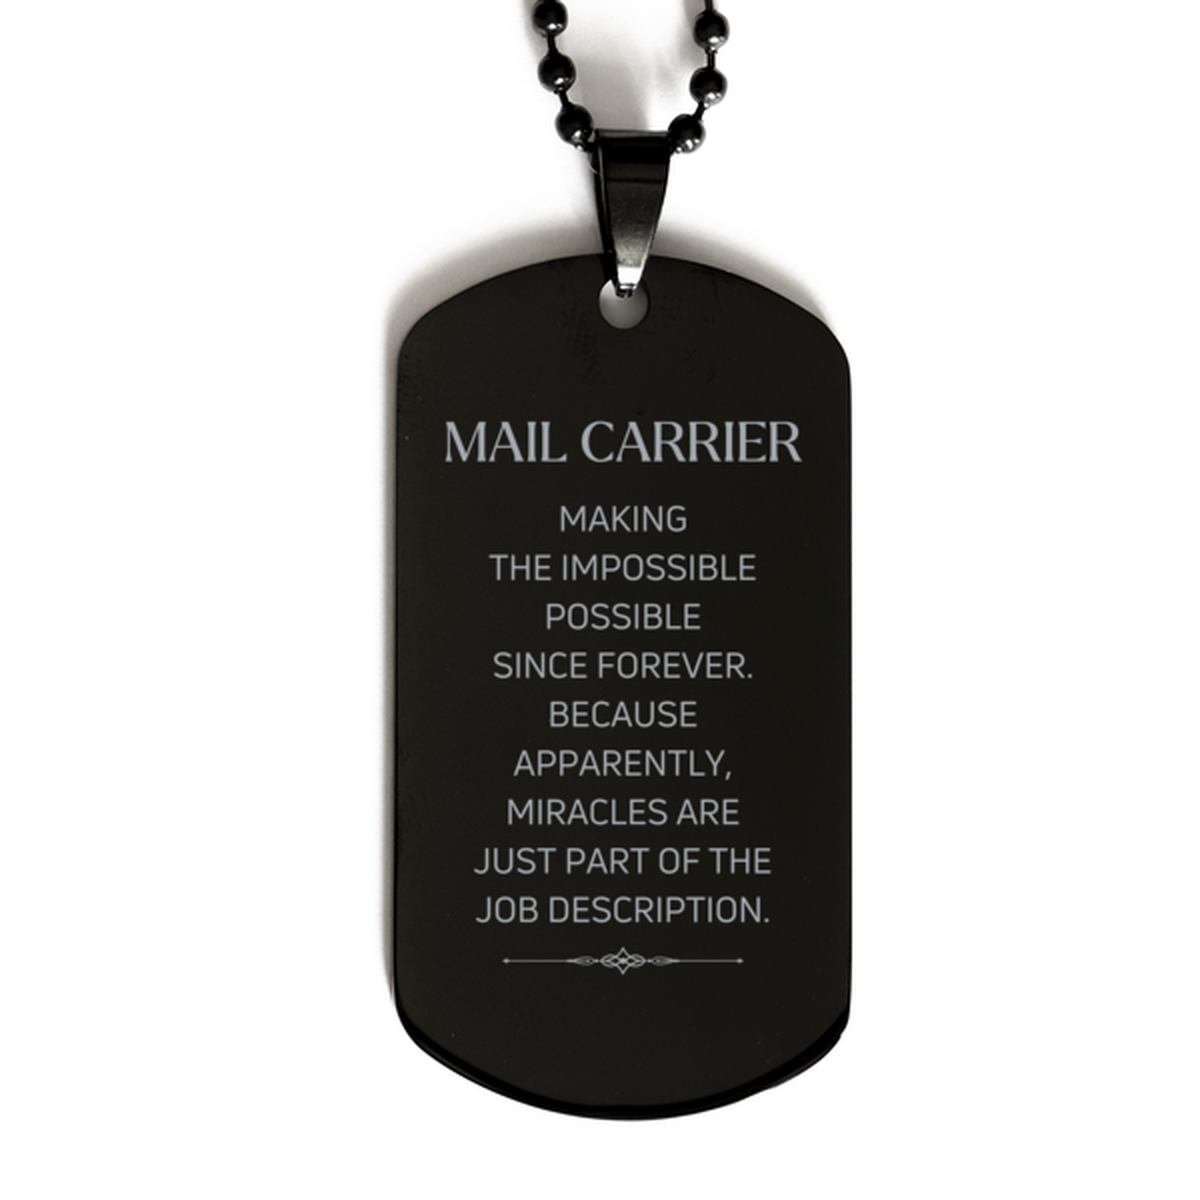 Funny Mail Carrier Gifts, Miracles are just part of the job description, Inspirational Birthday Black Dog Tag For Mail Carrier, Men, Women, Coworkers, Friends, Boss